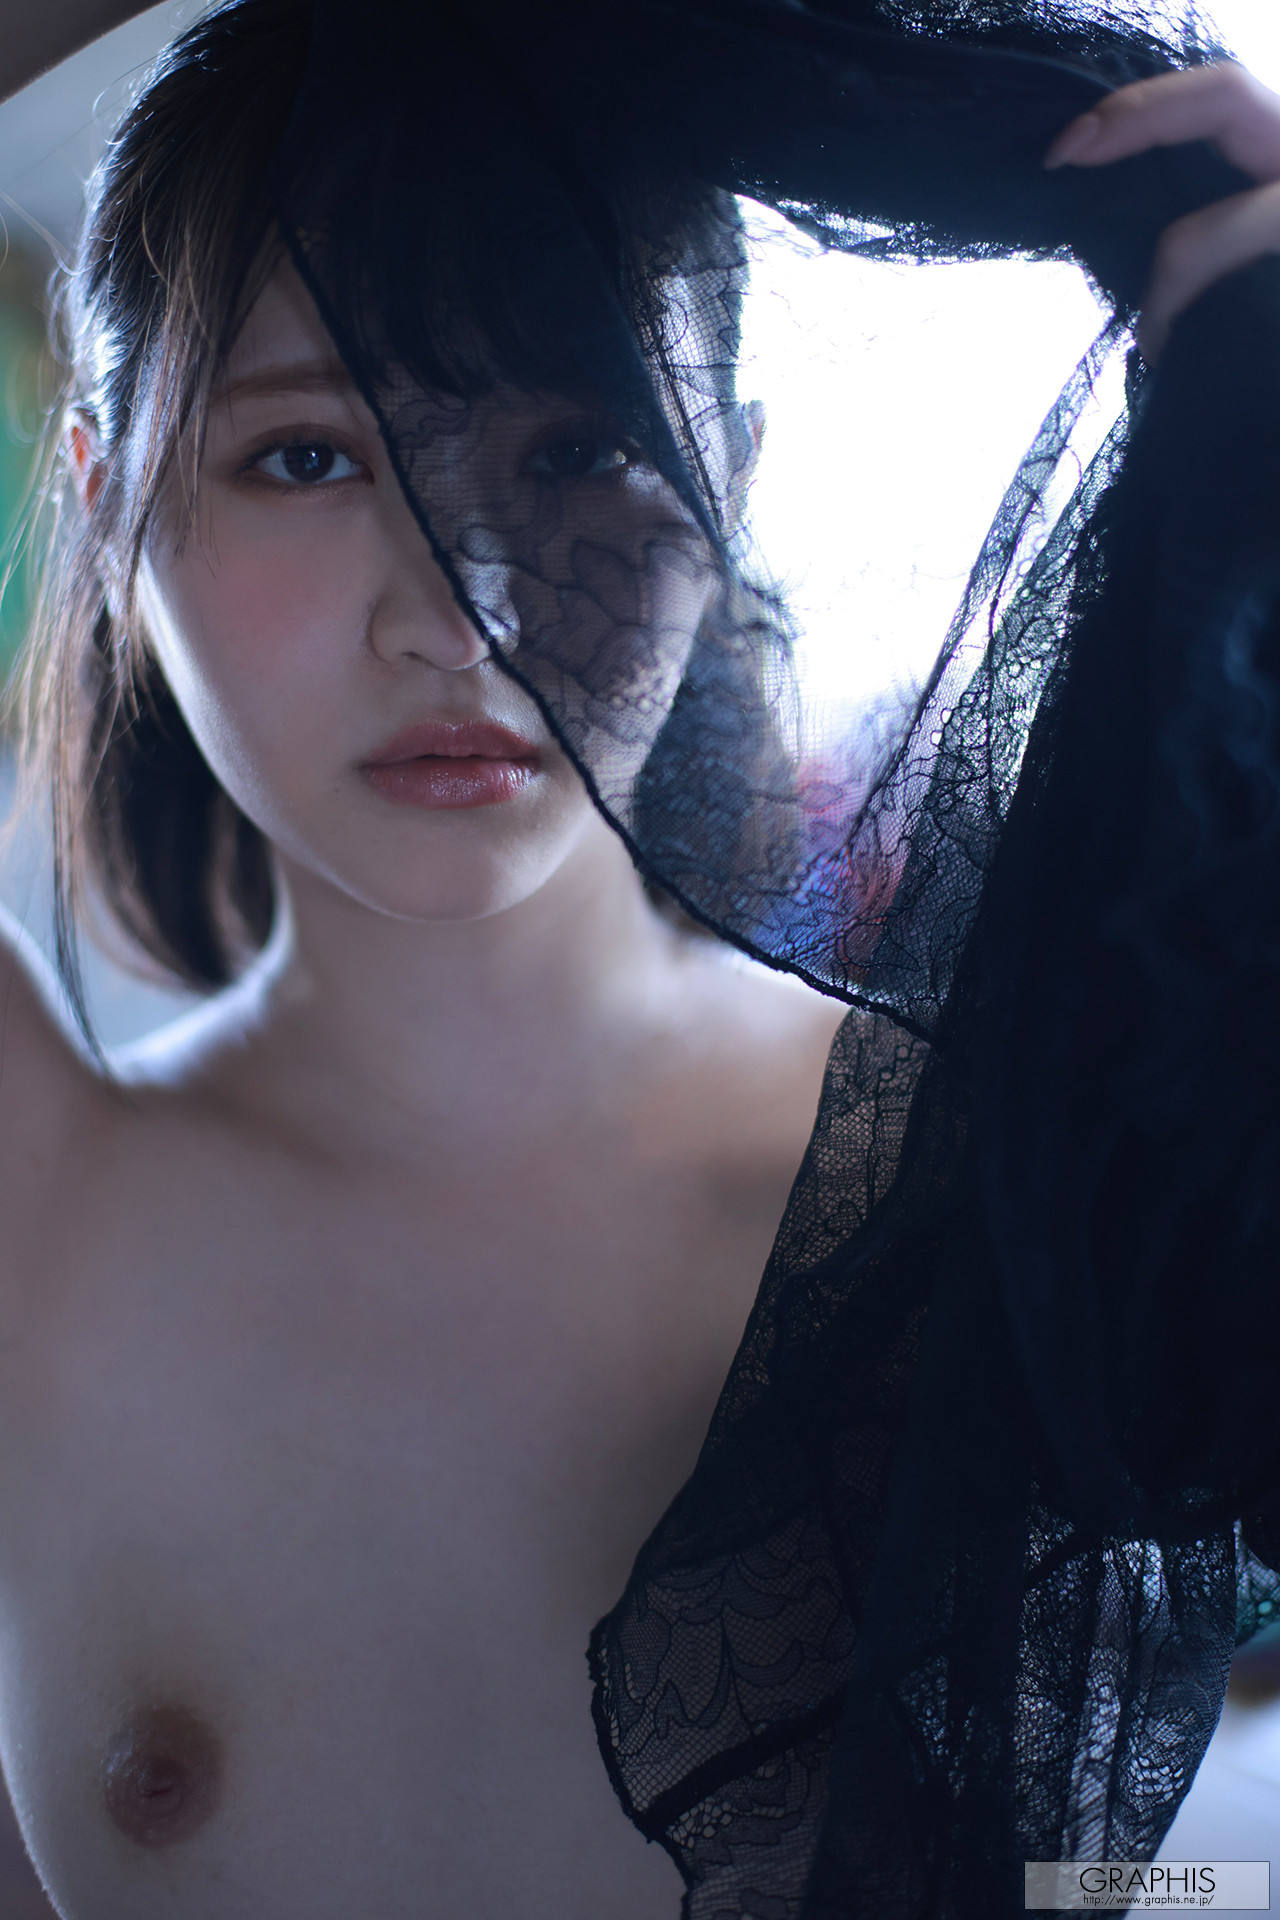 Rikka Ono 小野六花, [Graphis] Gals Beautiful Bouquet Vol.07